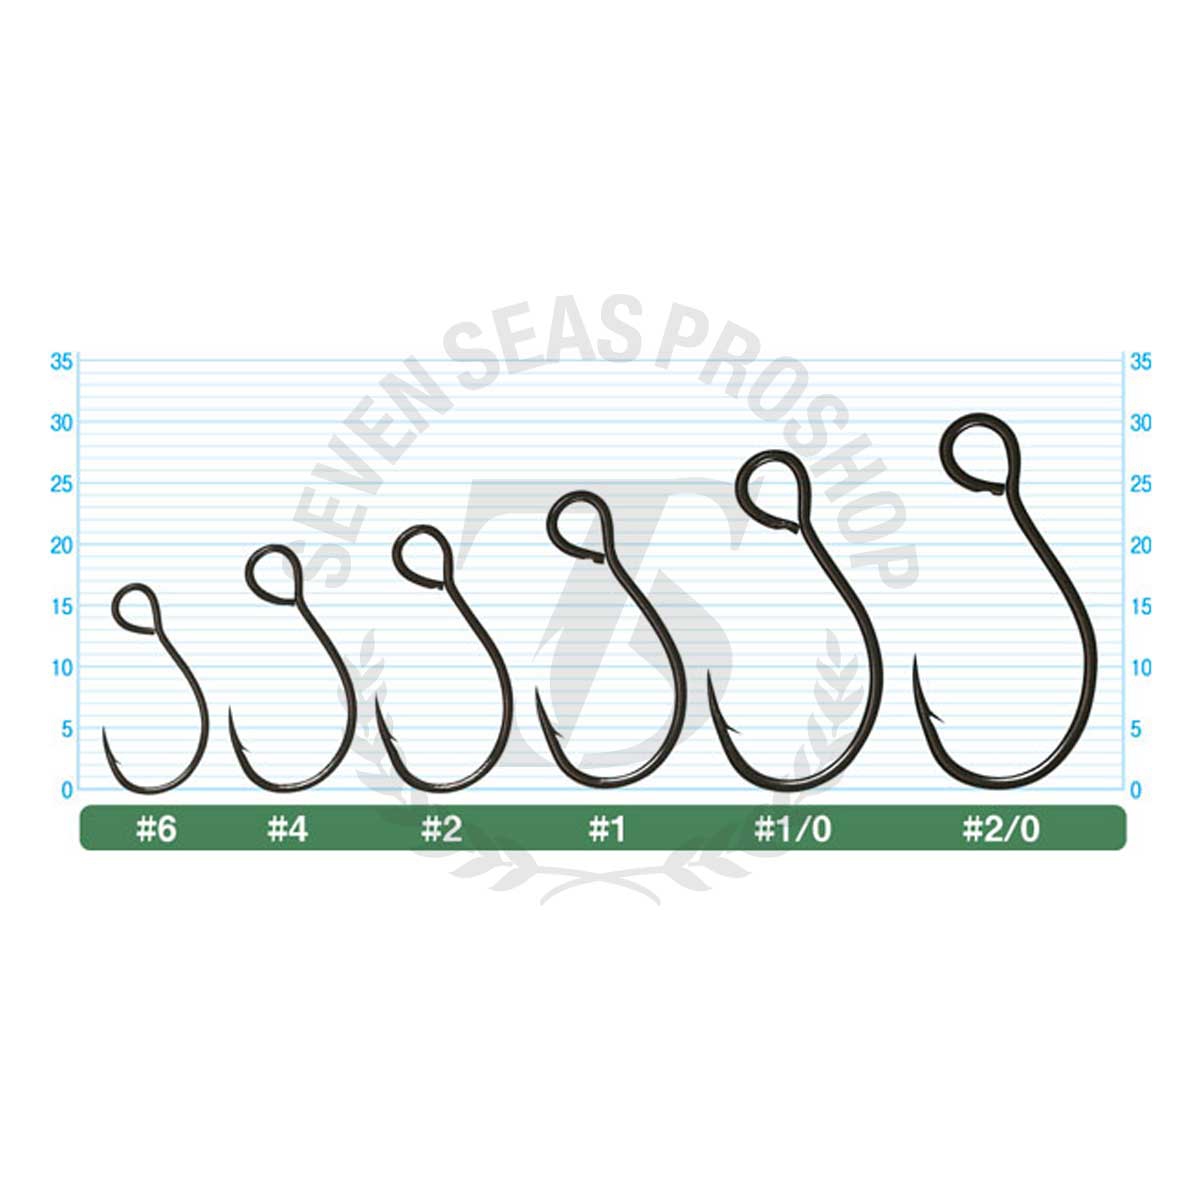 Owner S-75M Single Hook For Minnow #4 - 7 SEAS PROSHOP (THAILAND)